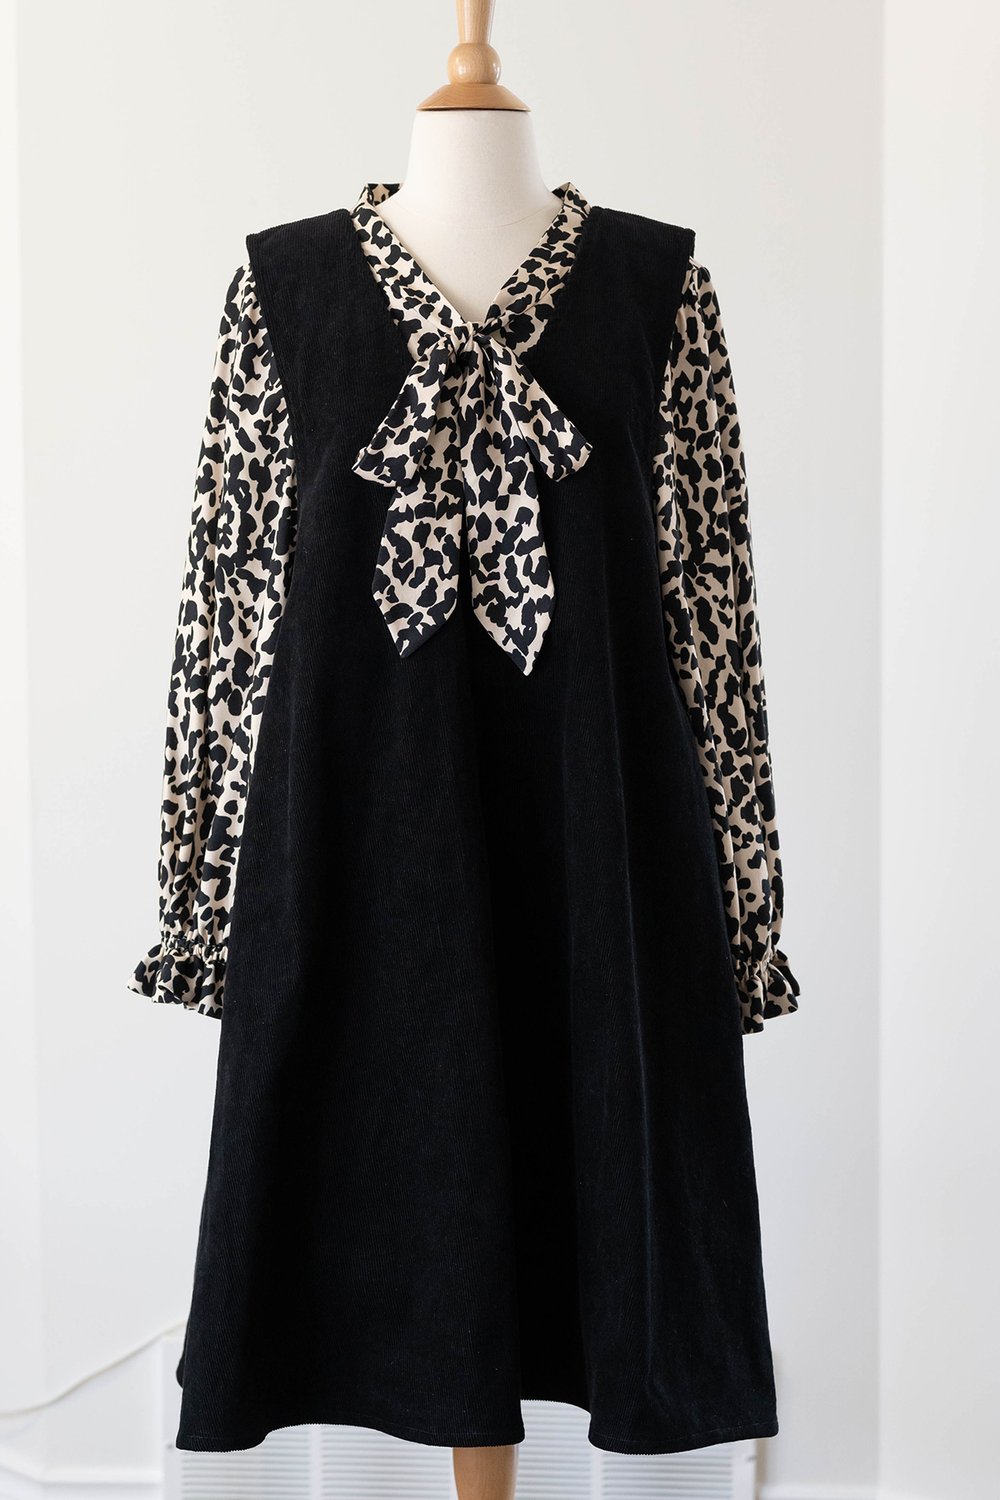 Black corduroy pinafore with a leopard print top